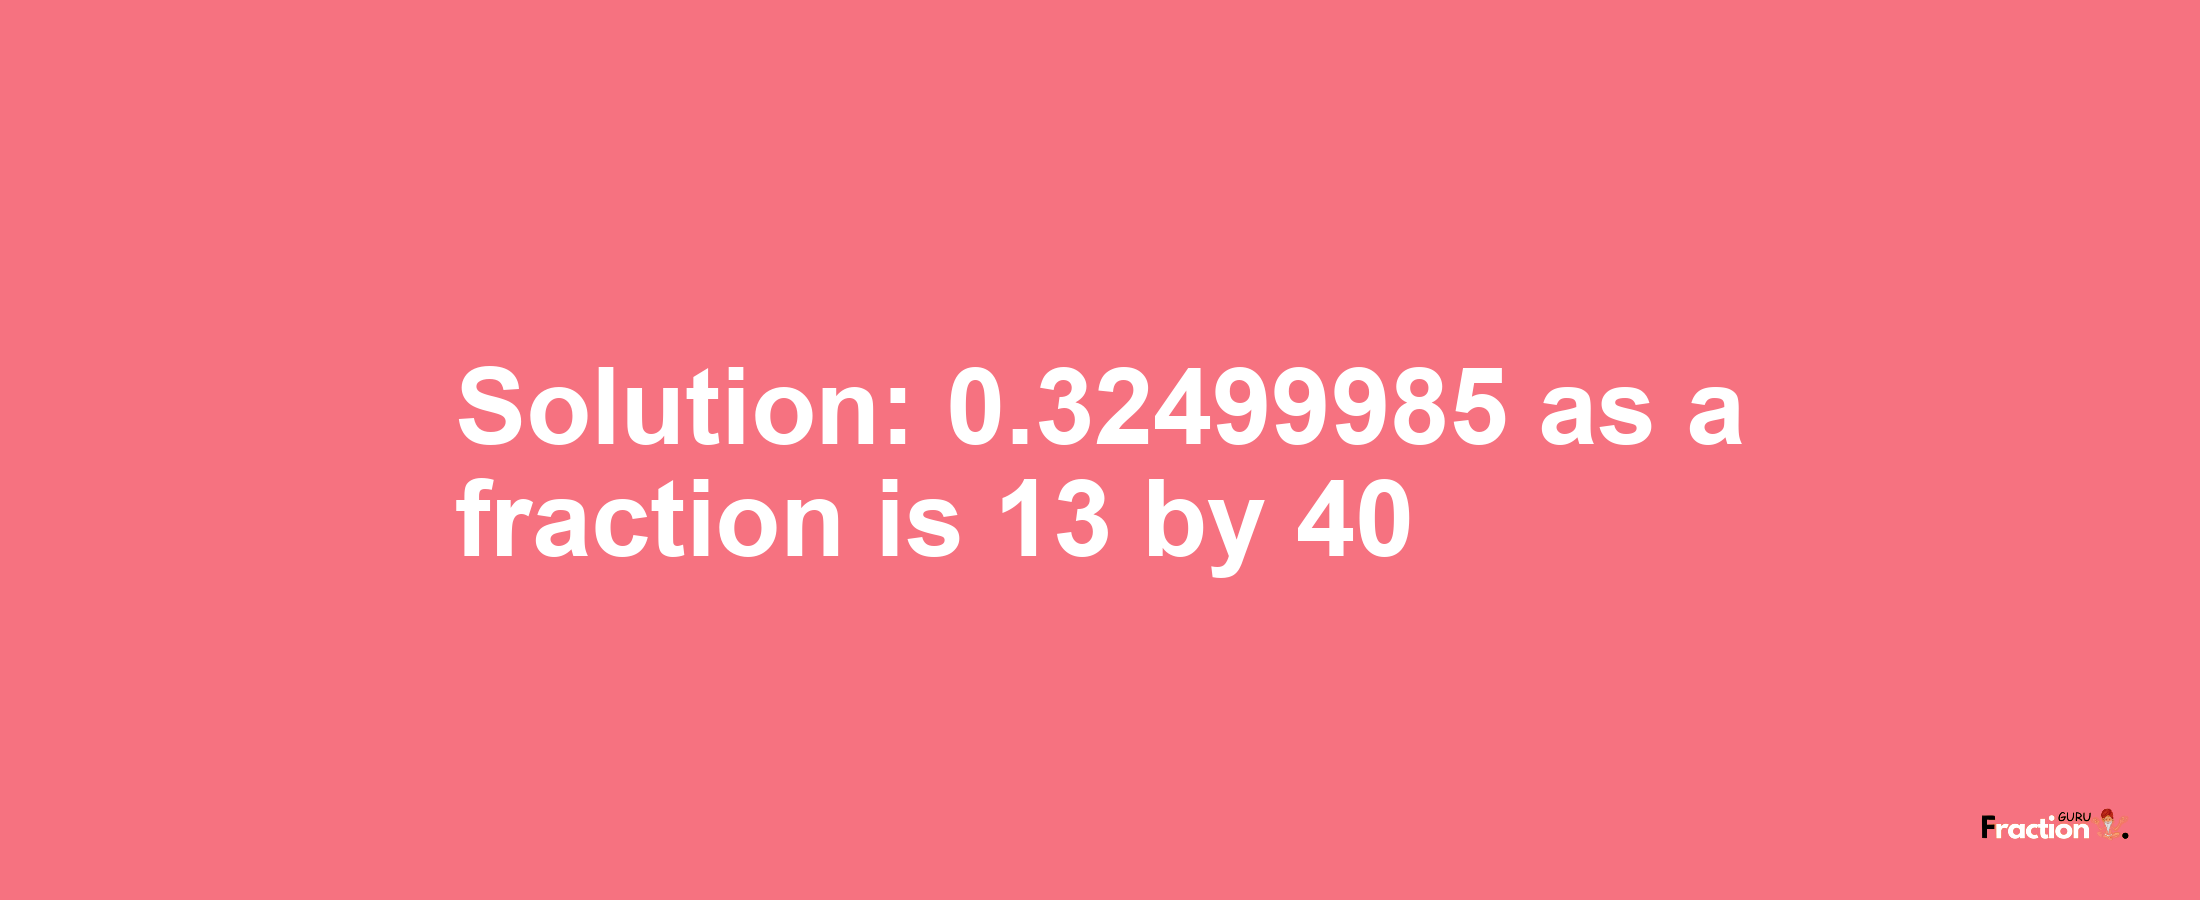 Solution:0.32499985 as a fraction is 13/40